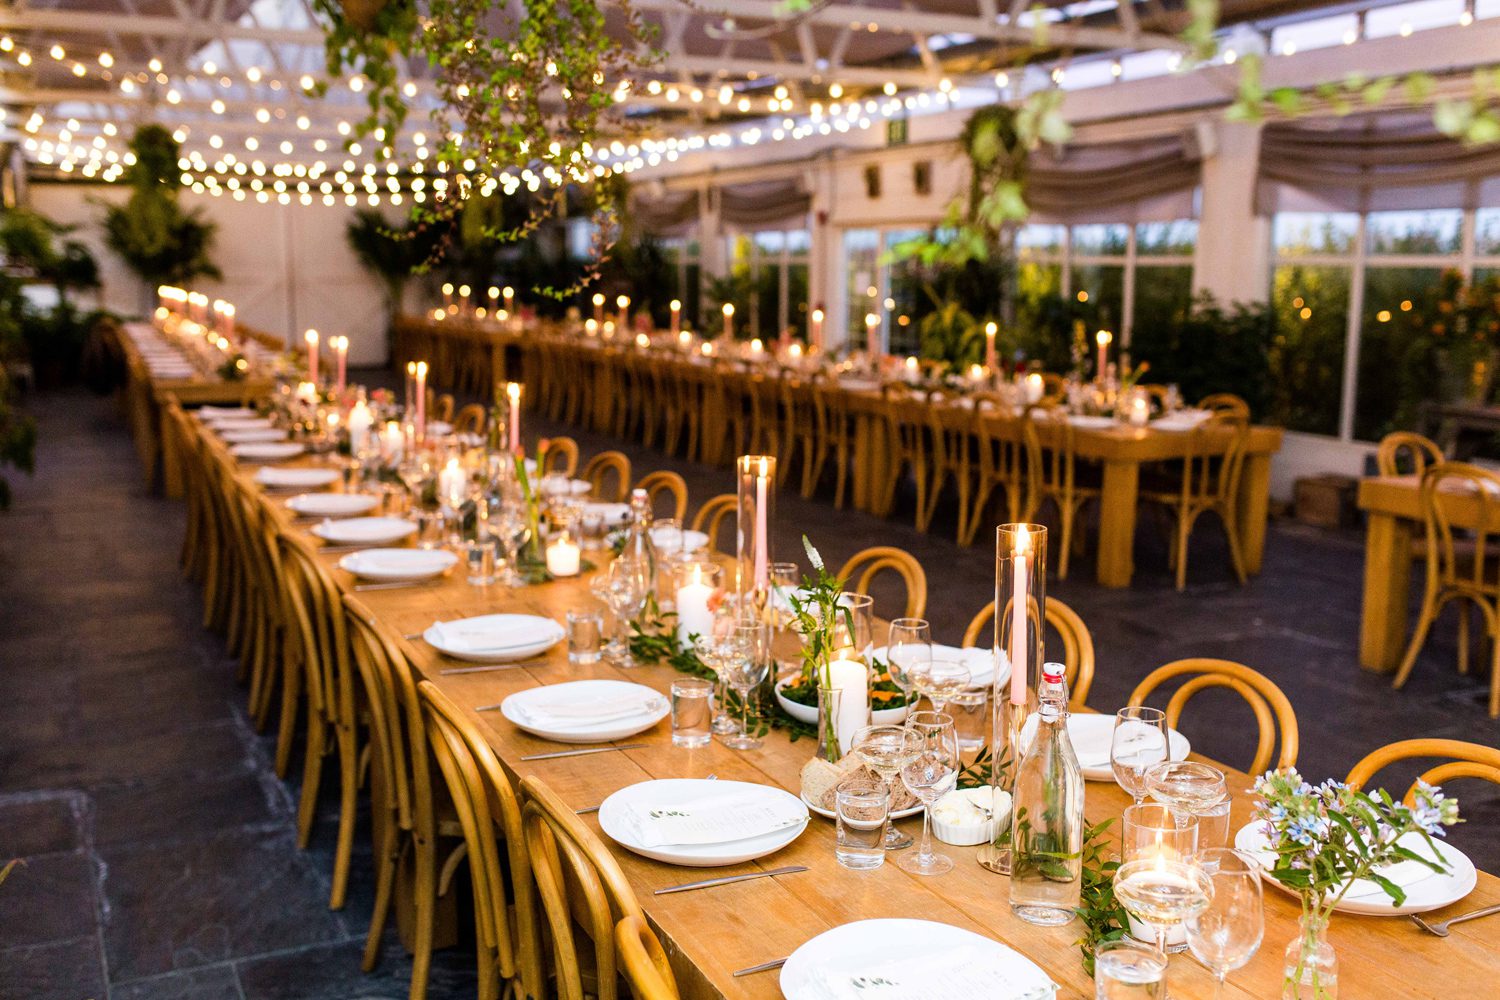 Wedding reception table decor at Audrey's Farmhouse Greenhouse featuring candles and floral arrangements in small glass vases